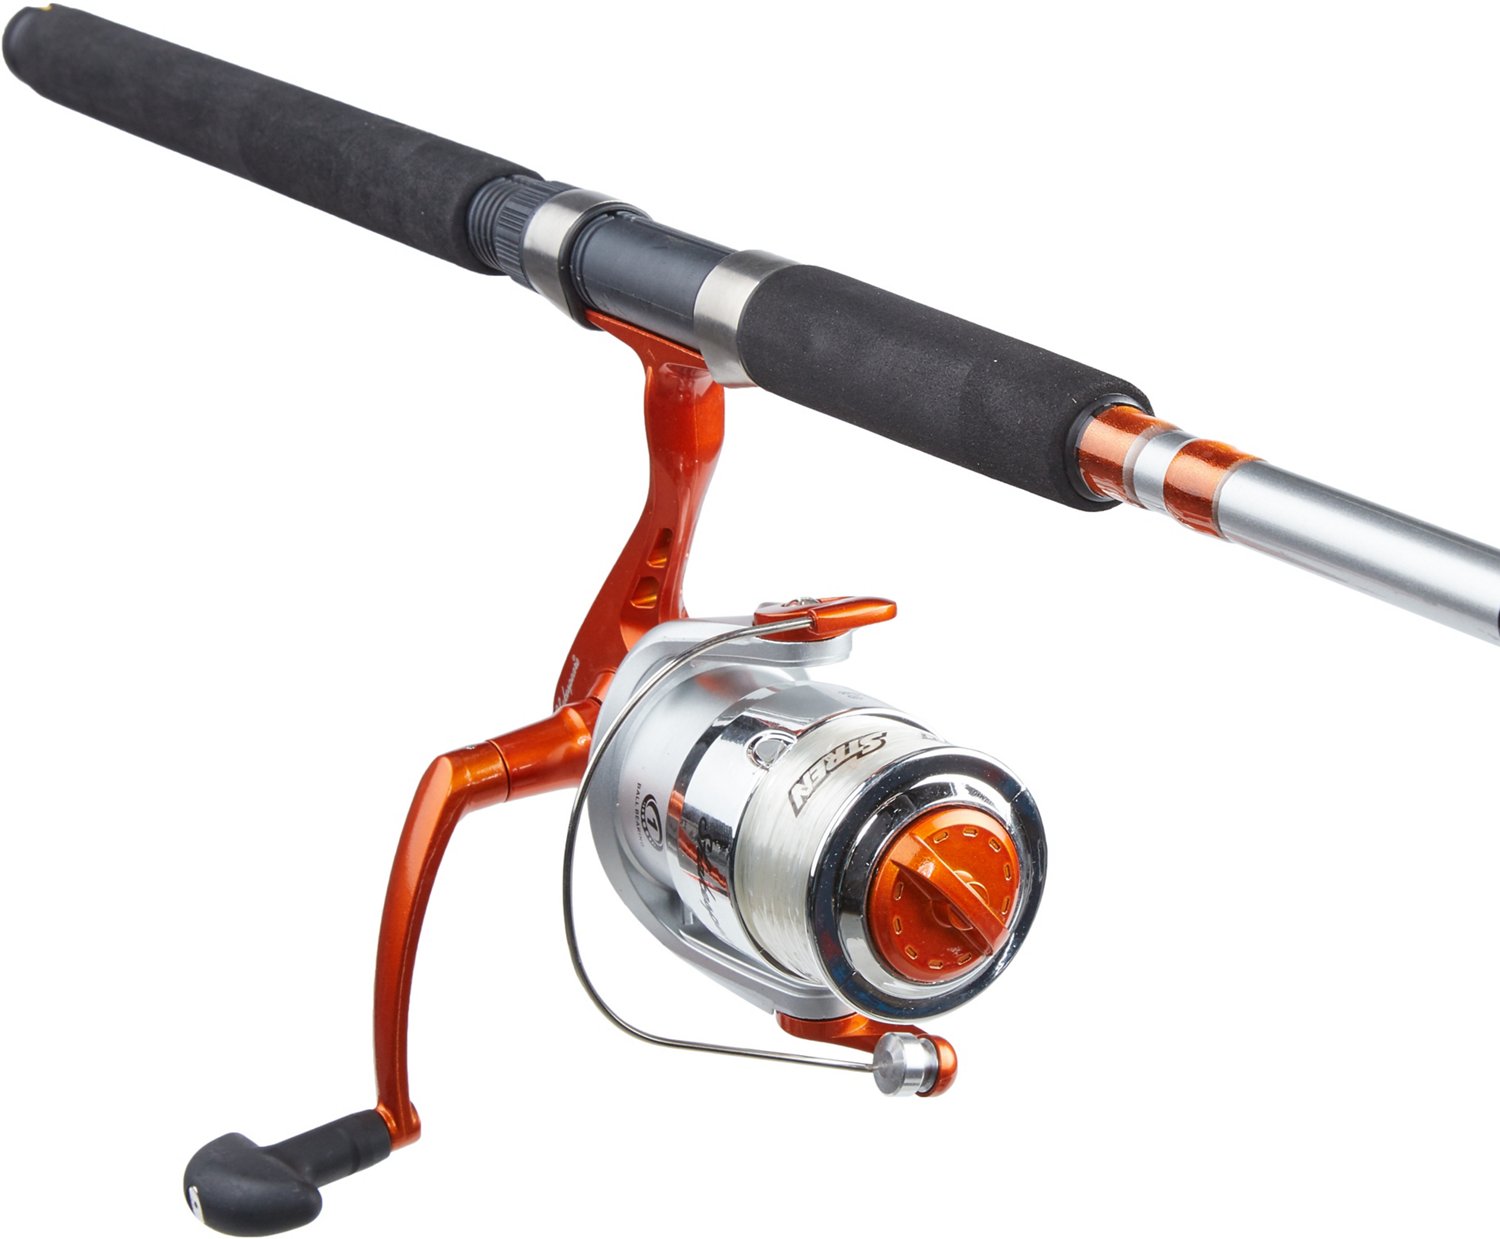 Shakespeare Catch More Fish 7 ft M Catfish Spinning Rod and Reel